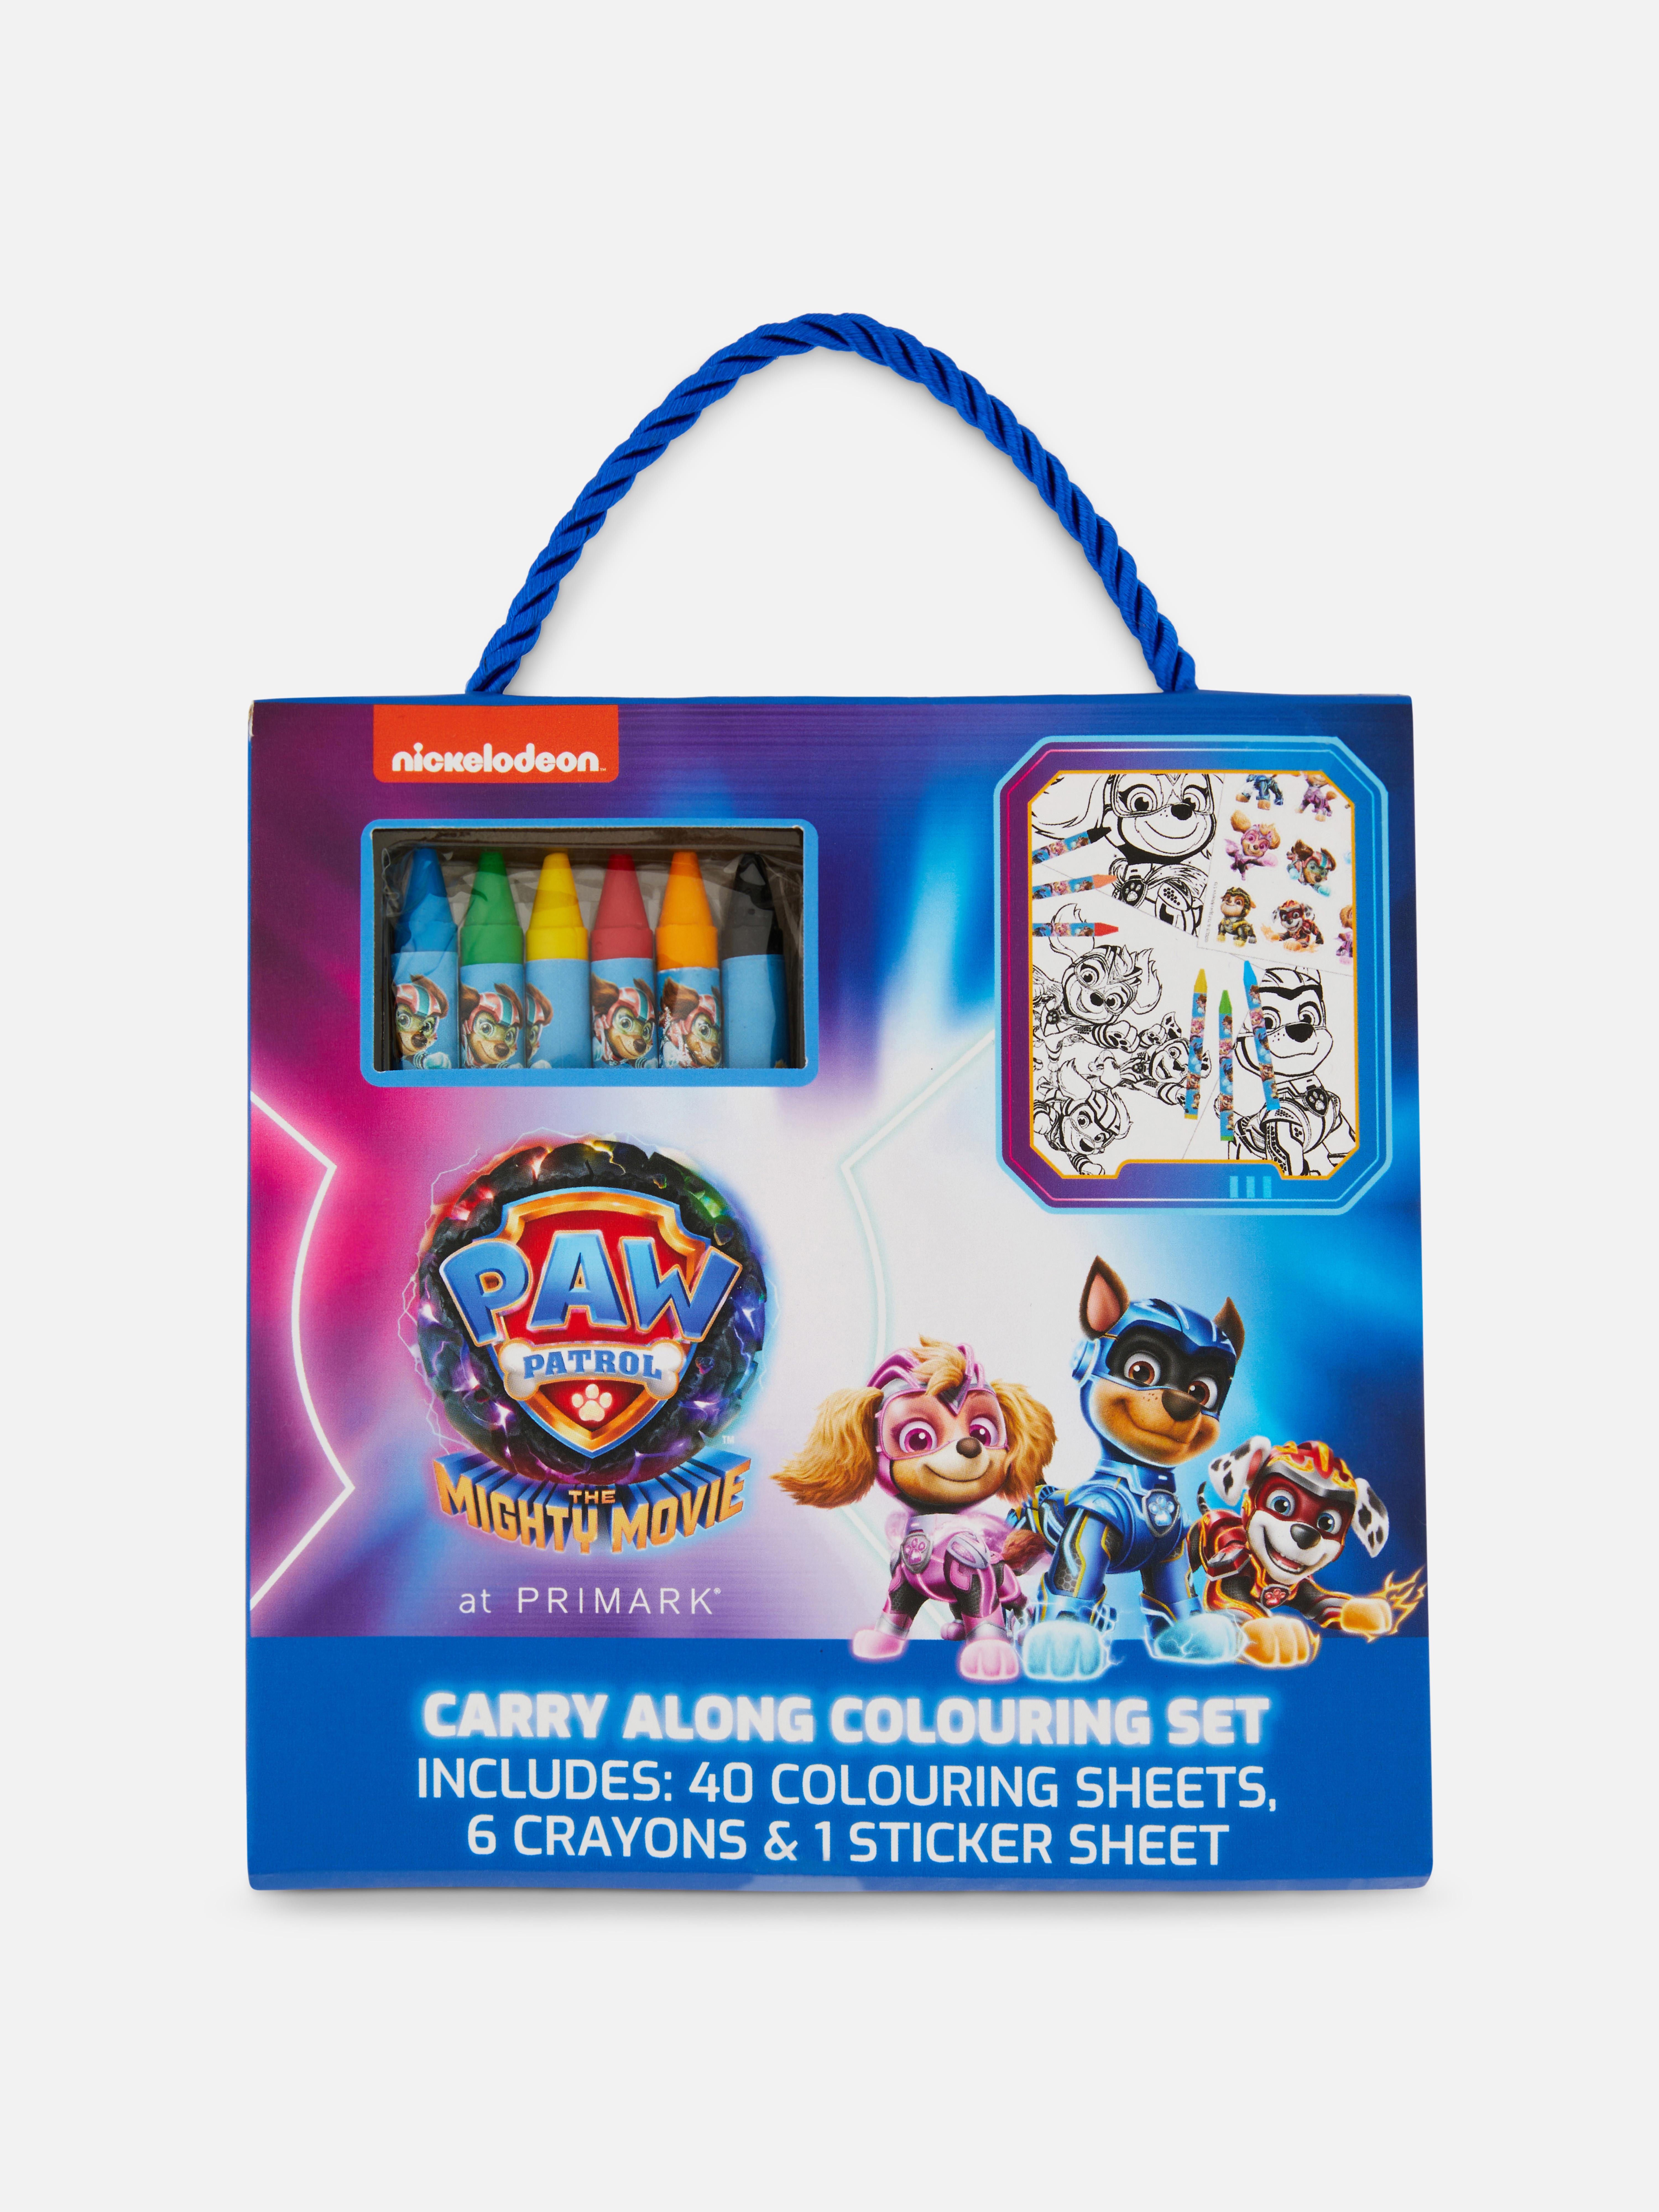 PAW Patrol Carry-Along Colouring Set